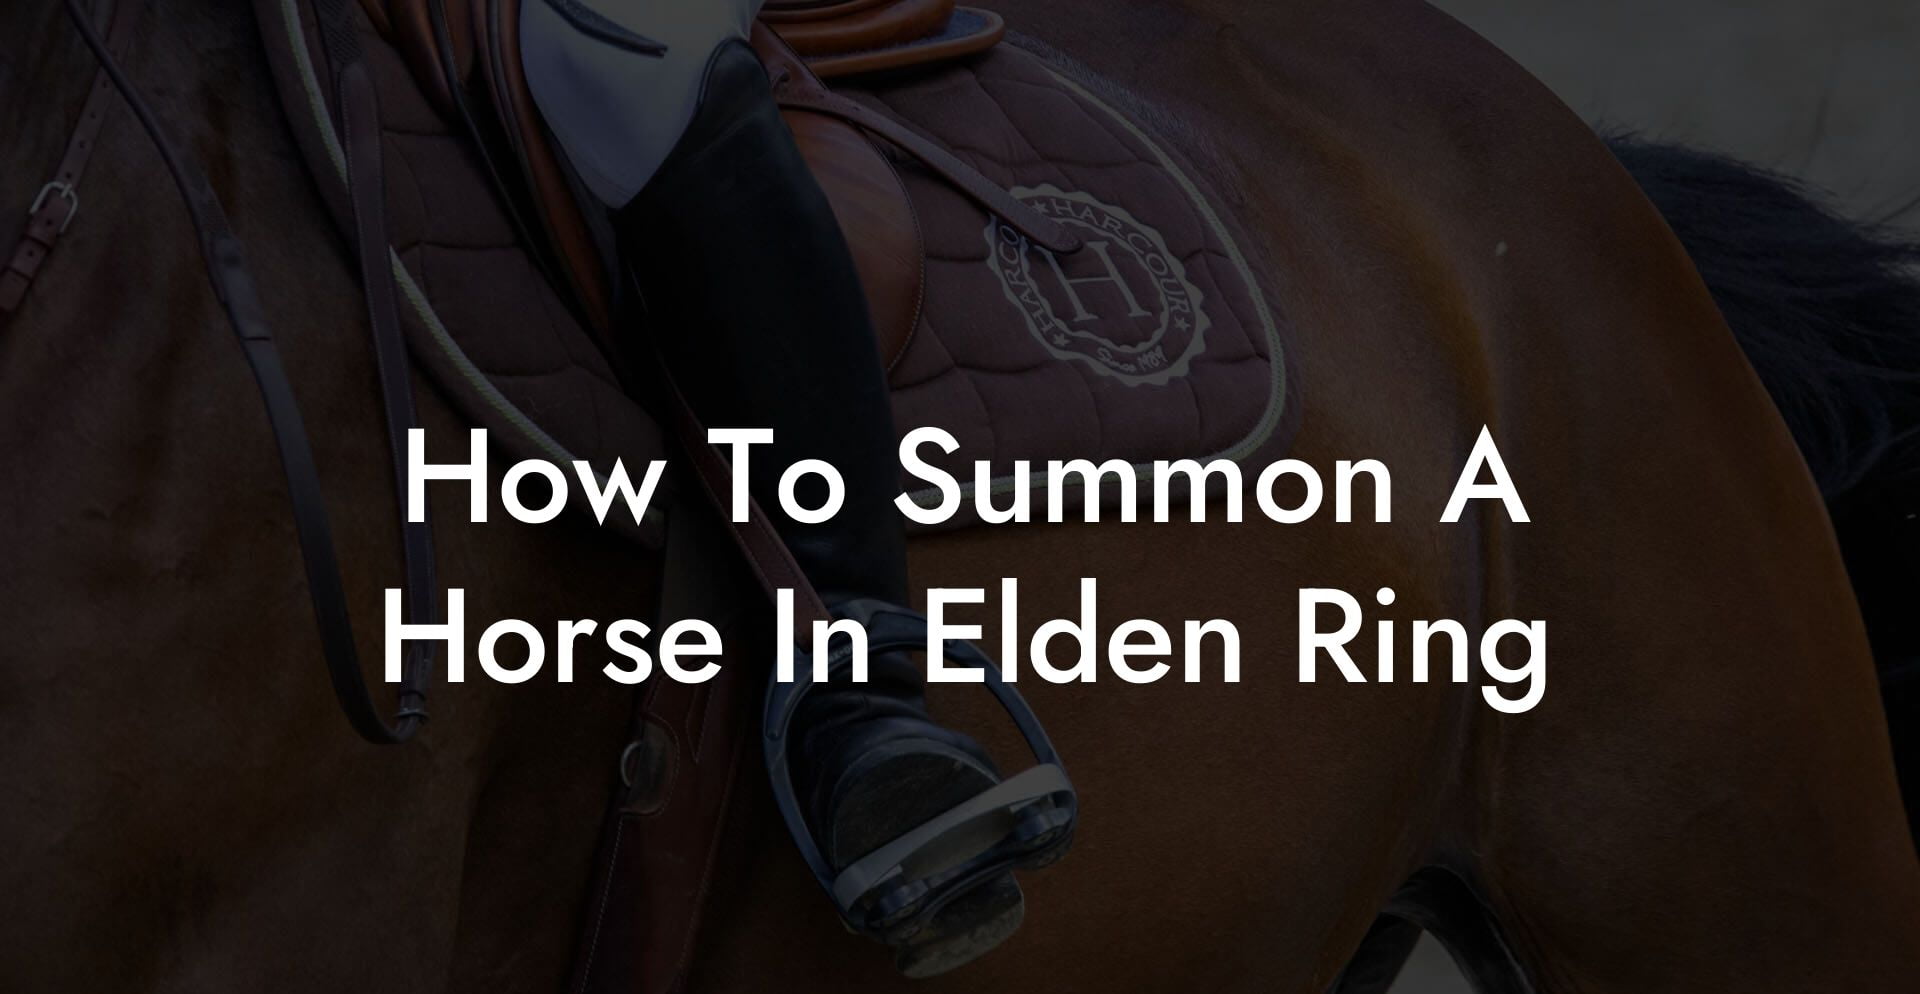 How To Summon A Horse In Elden Ring